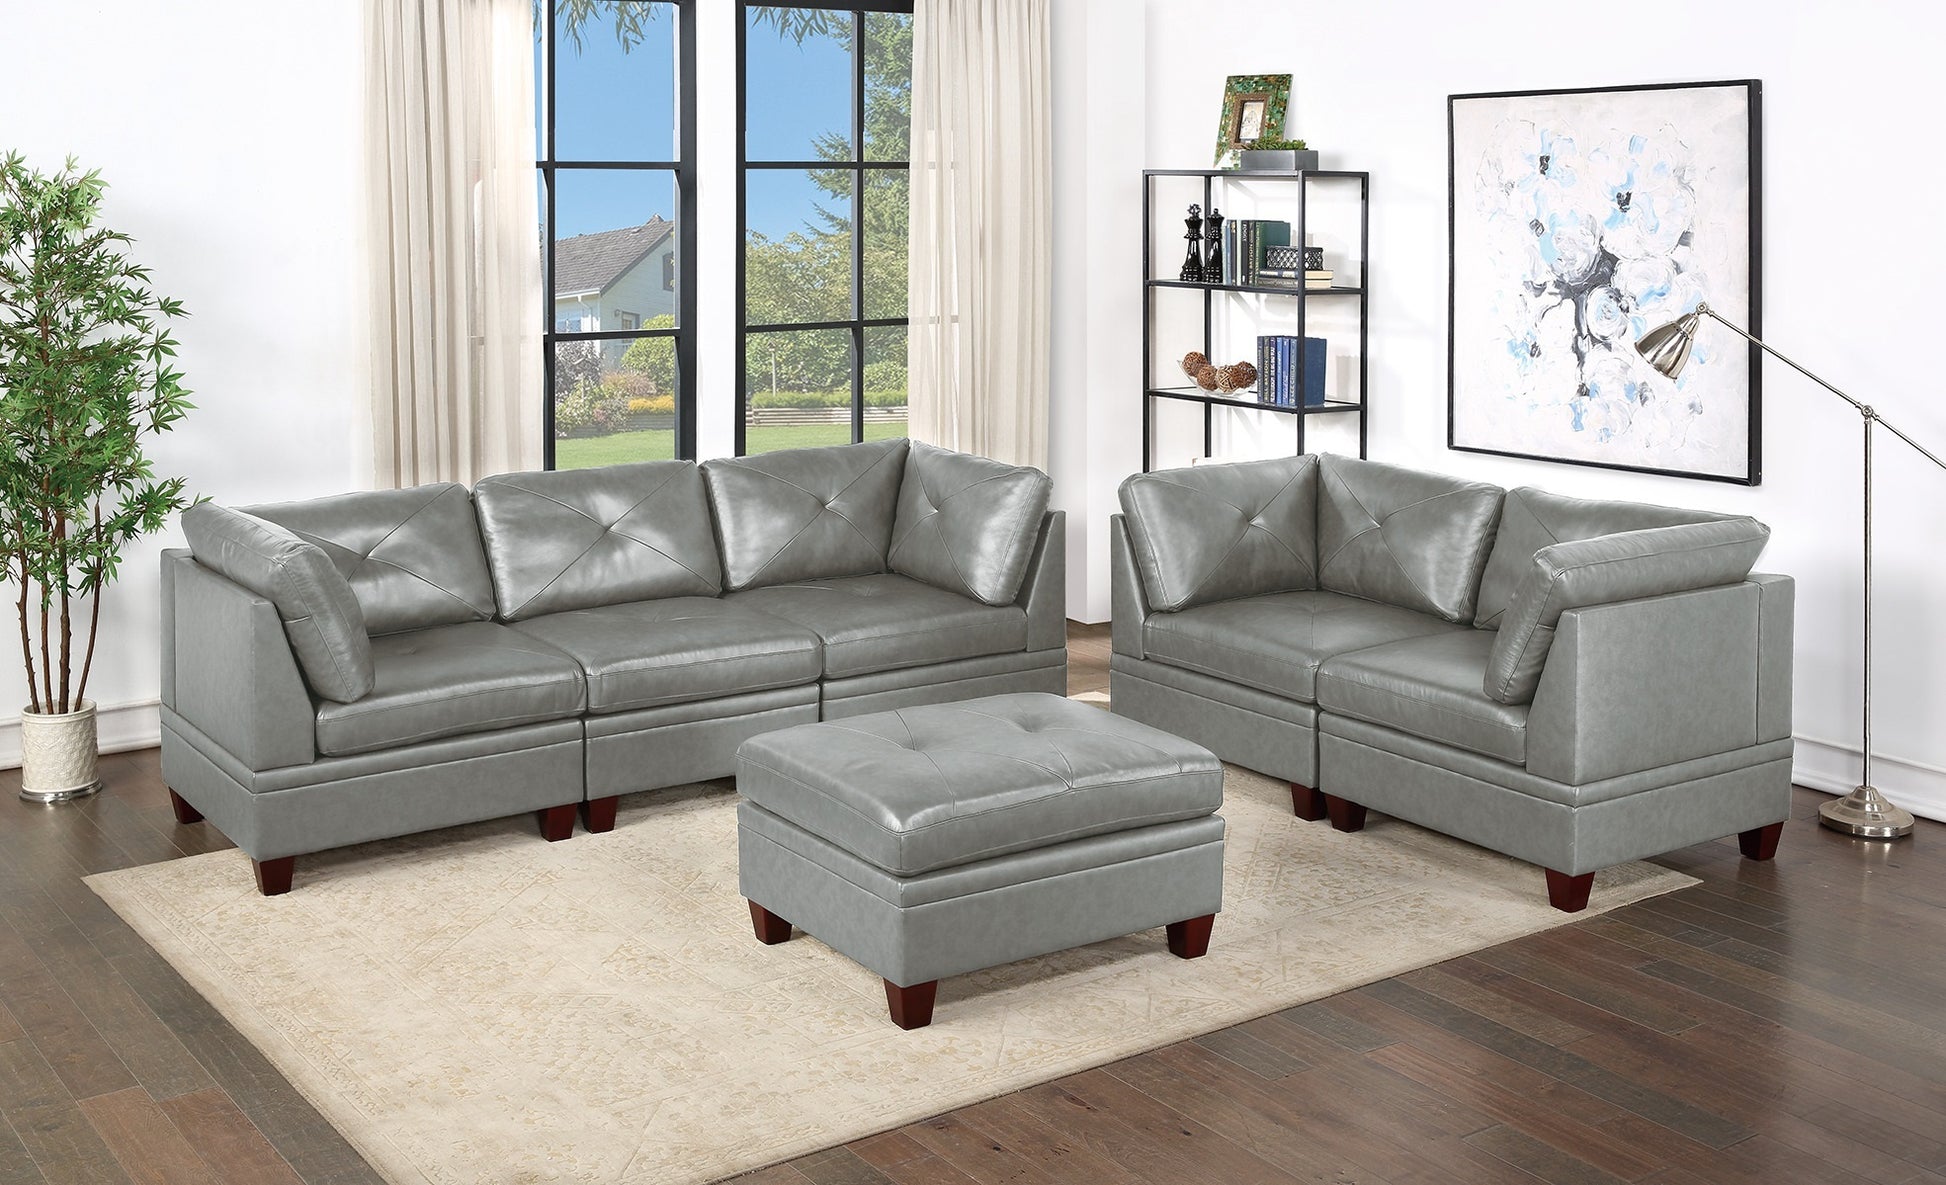 Genuine Leather Grey Color Tufted 6pc Modular Sofa Set grey-genuine leather-wood-primary living